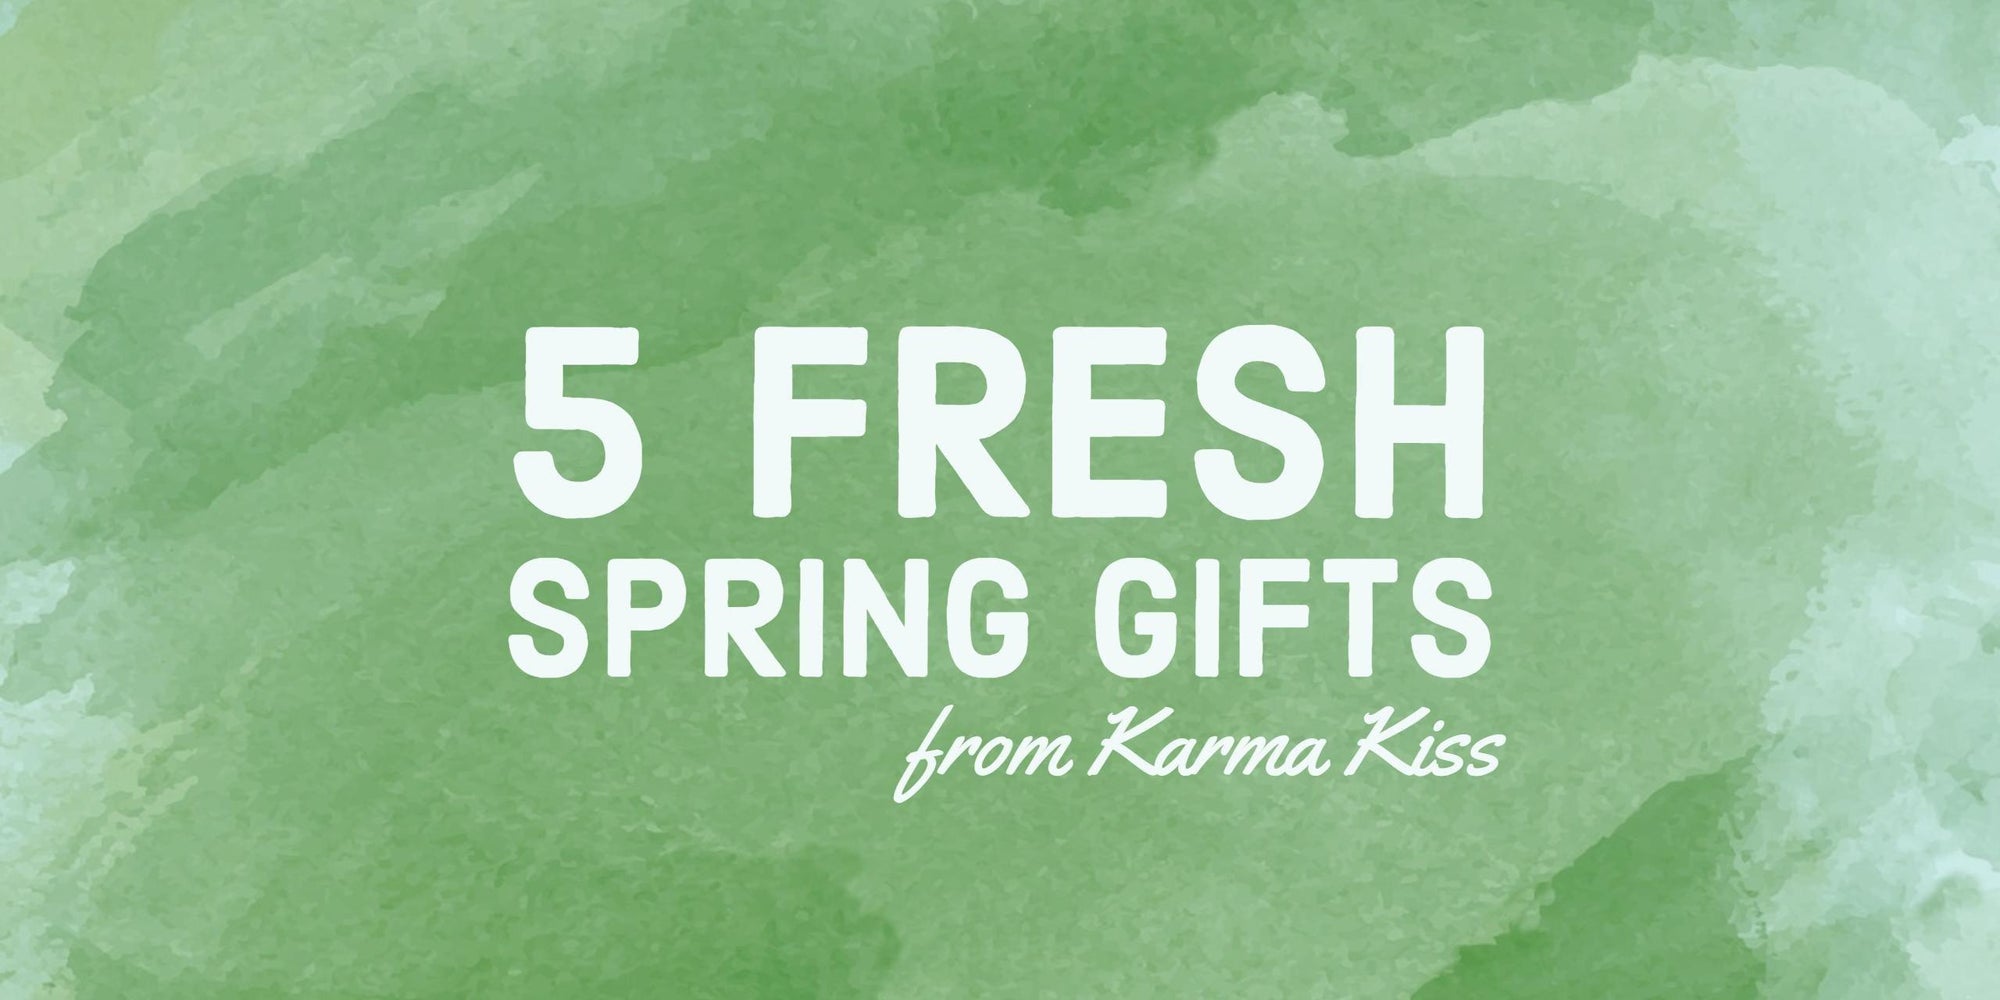 The Best New Gifts from Karma Kiss!